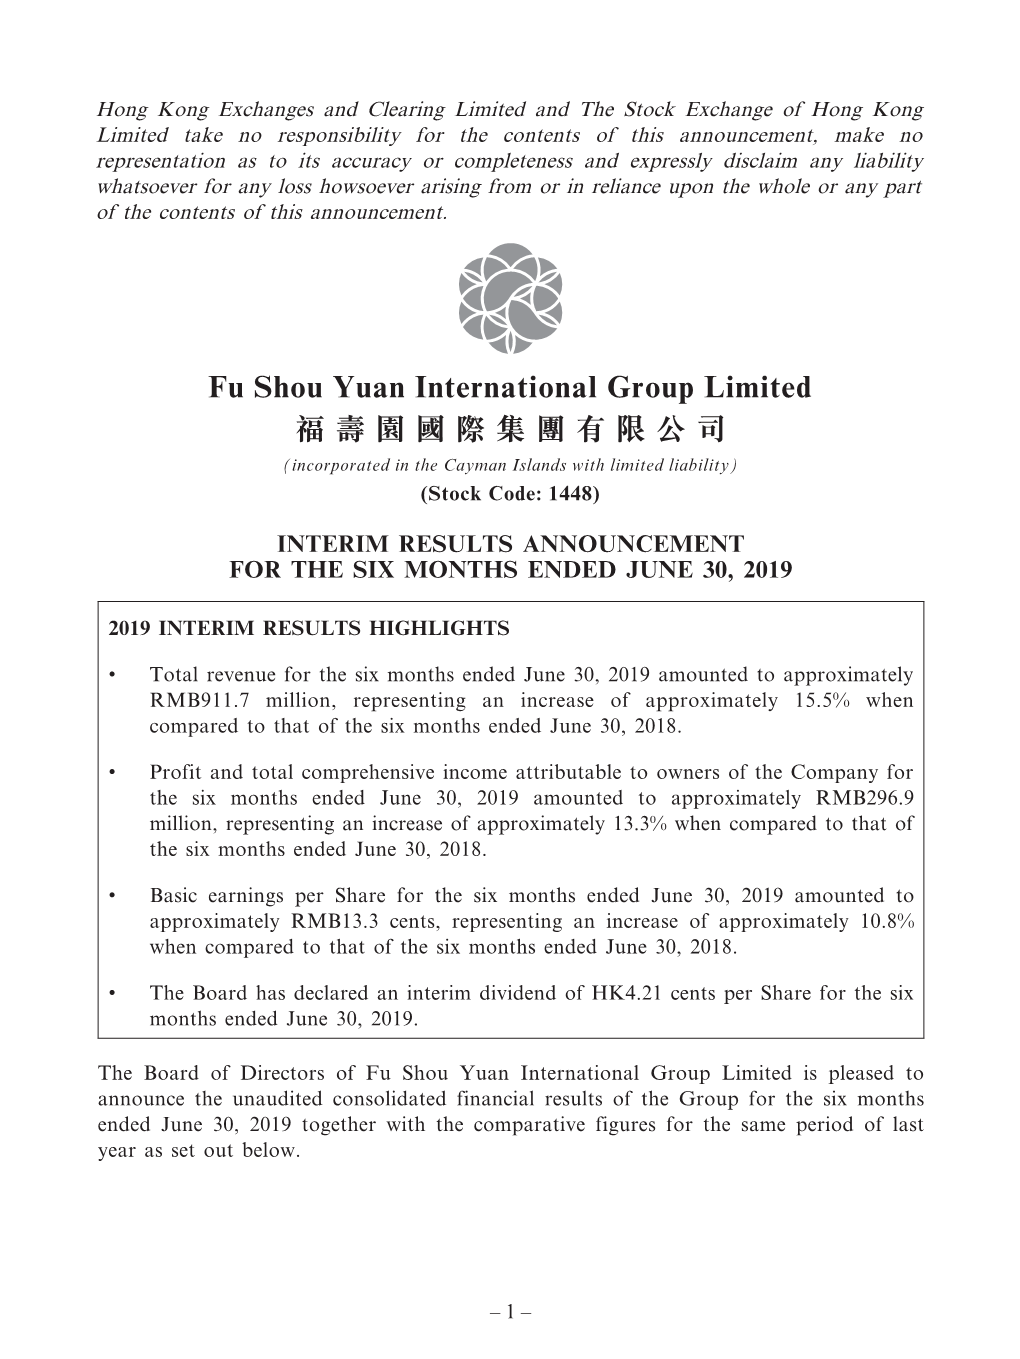 Fu Shou Yuan International Group Limited 福壽園國際集團有限公司 (Incorporated in the Cayman Islands with Limited Liability) (Stock Code: 1448)